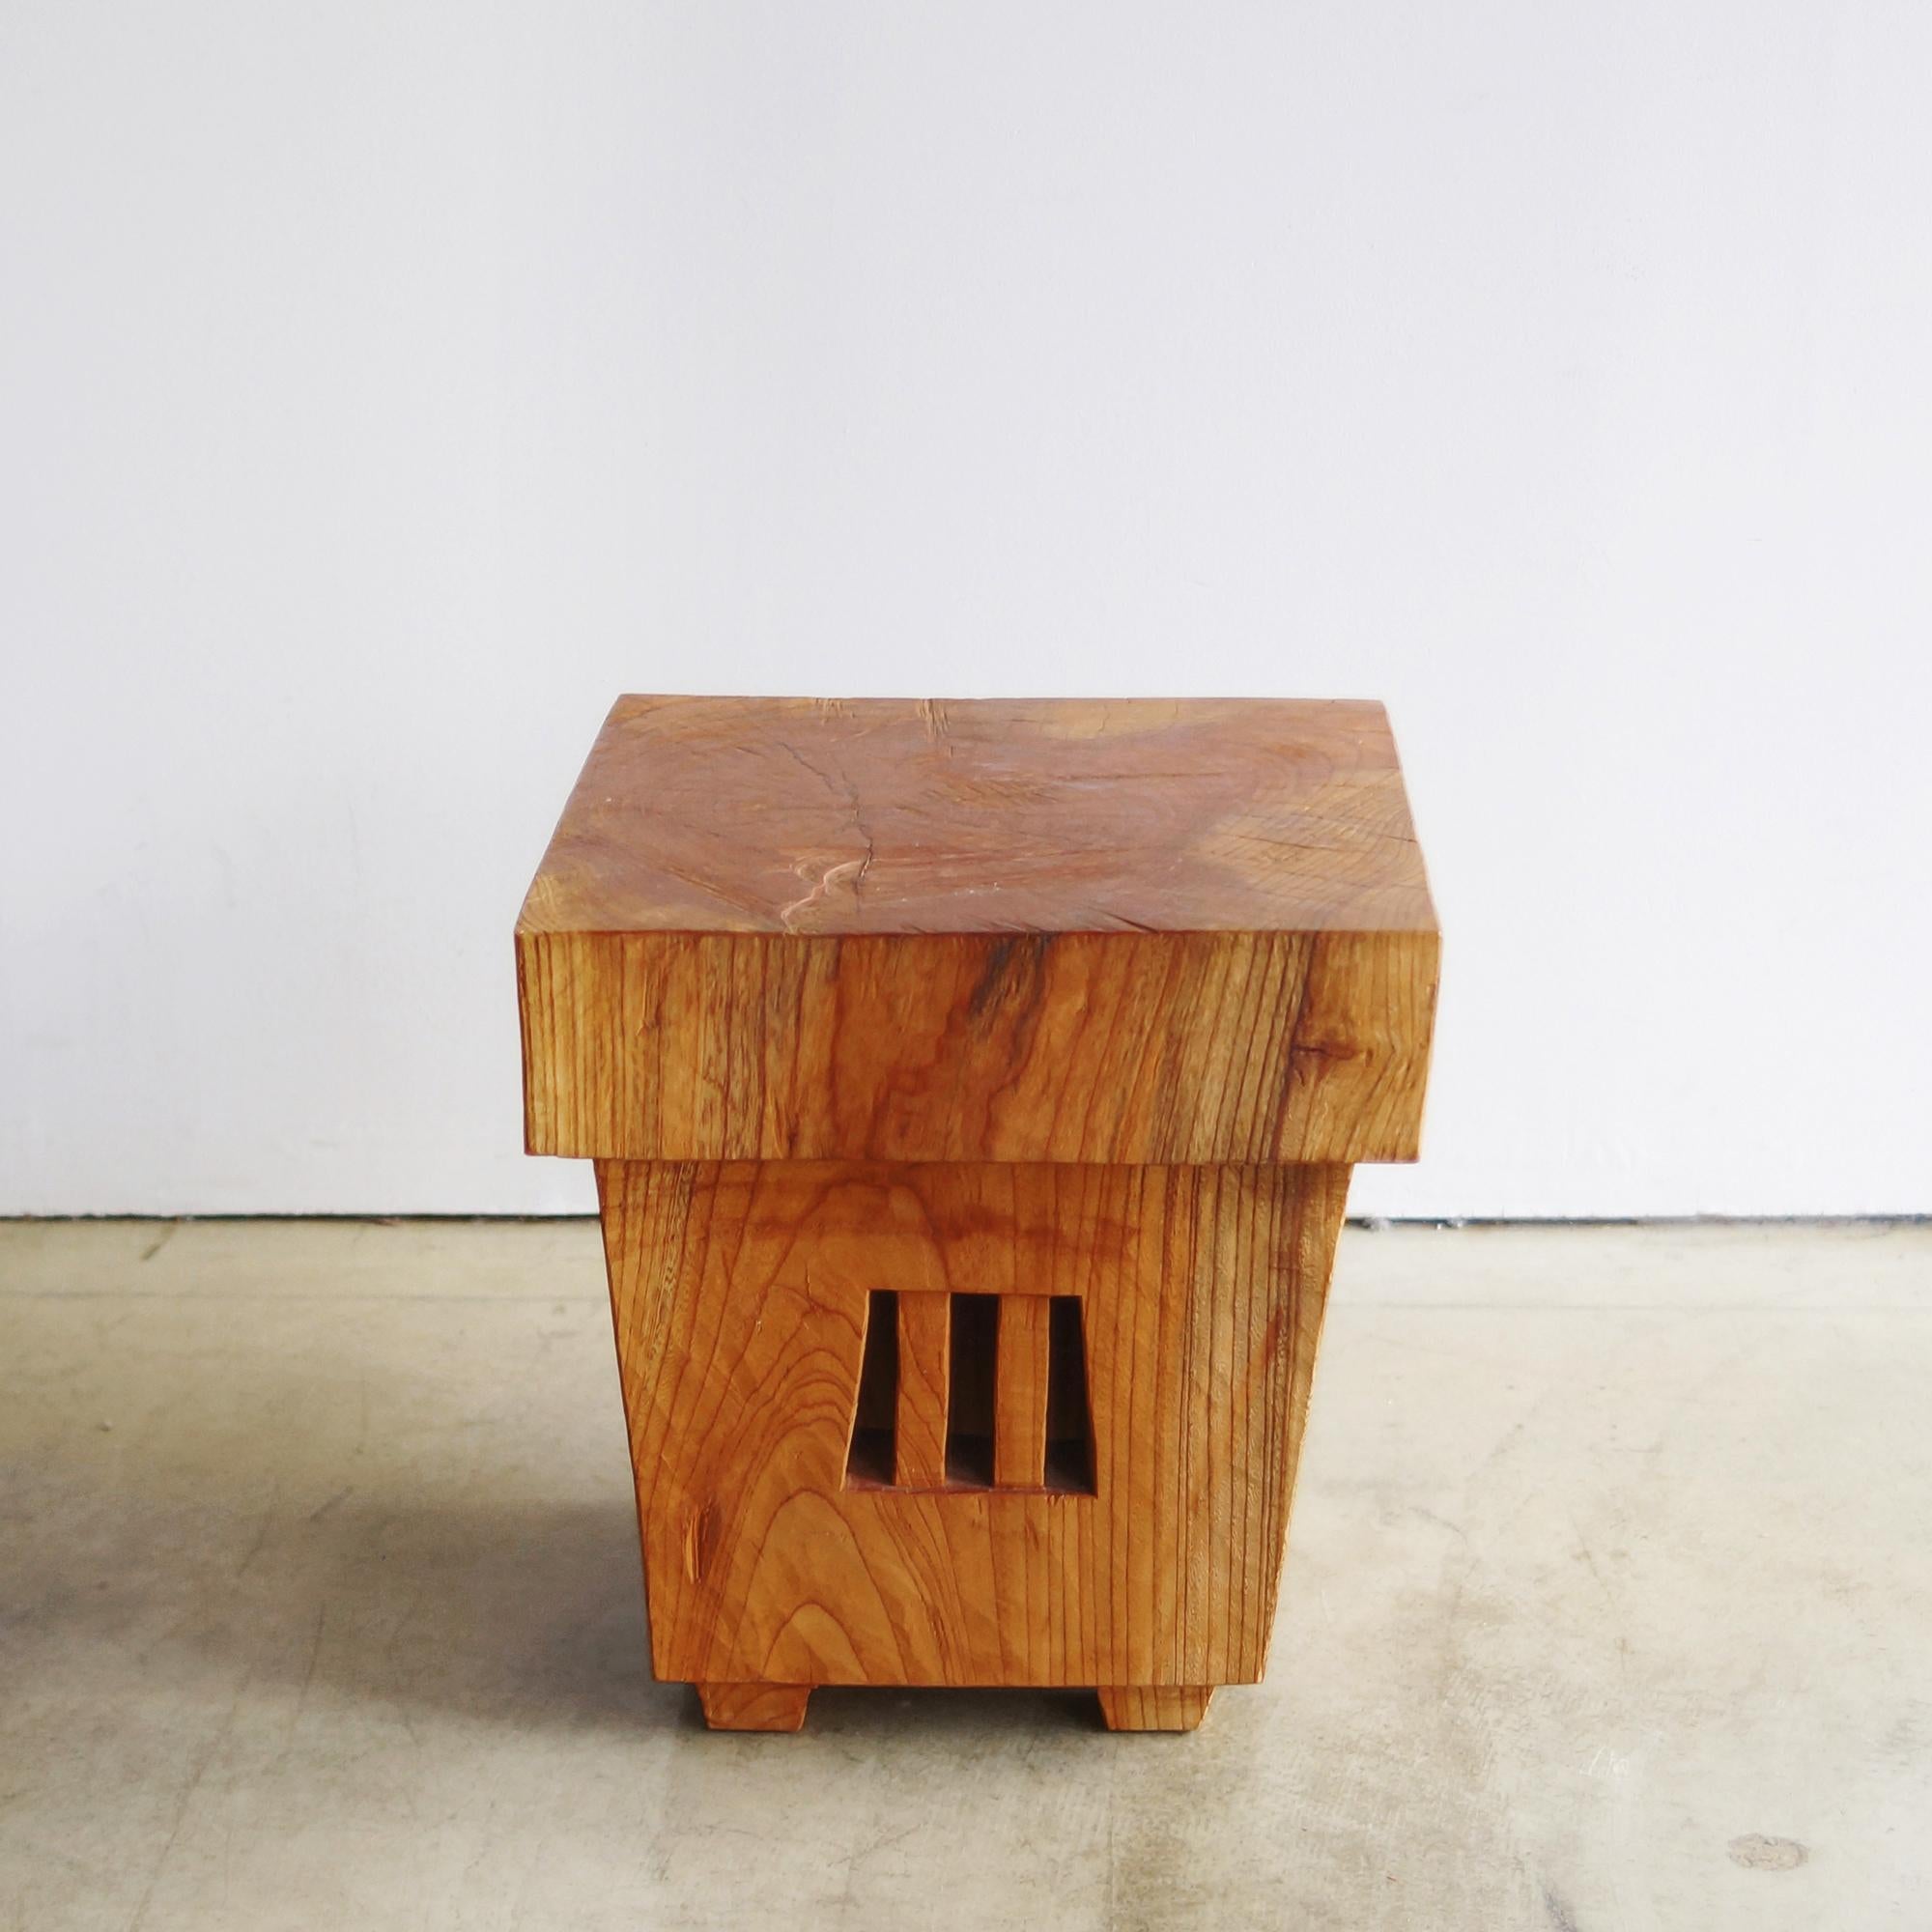 Name: The house in the village
Sculptural stool by Hiroyuki Nishimura and zougei carved furniture
Material: Zelkova
This work is carved from log with some kinds of chainsaws.
Most of wood used for Nishimura's works are unable to use anything,